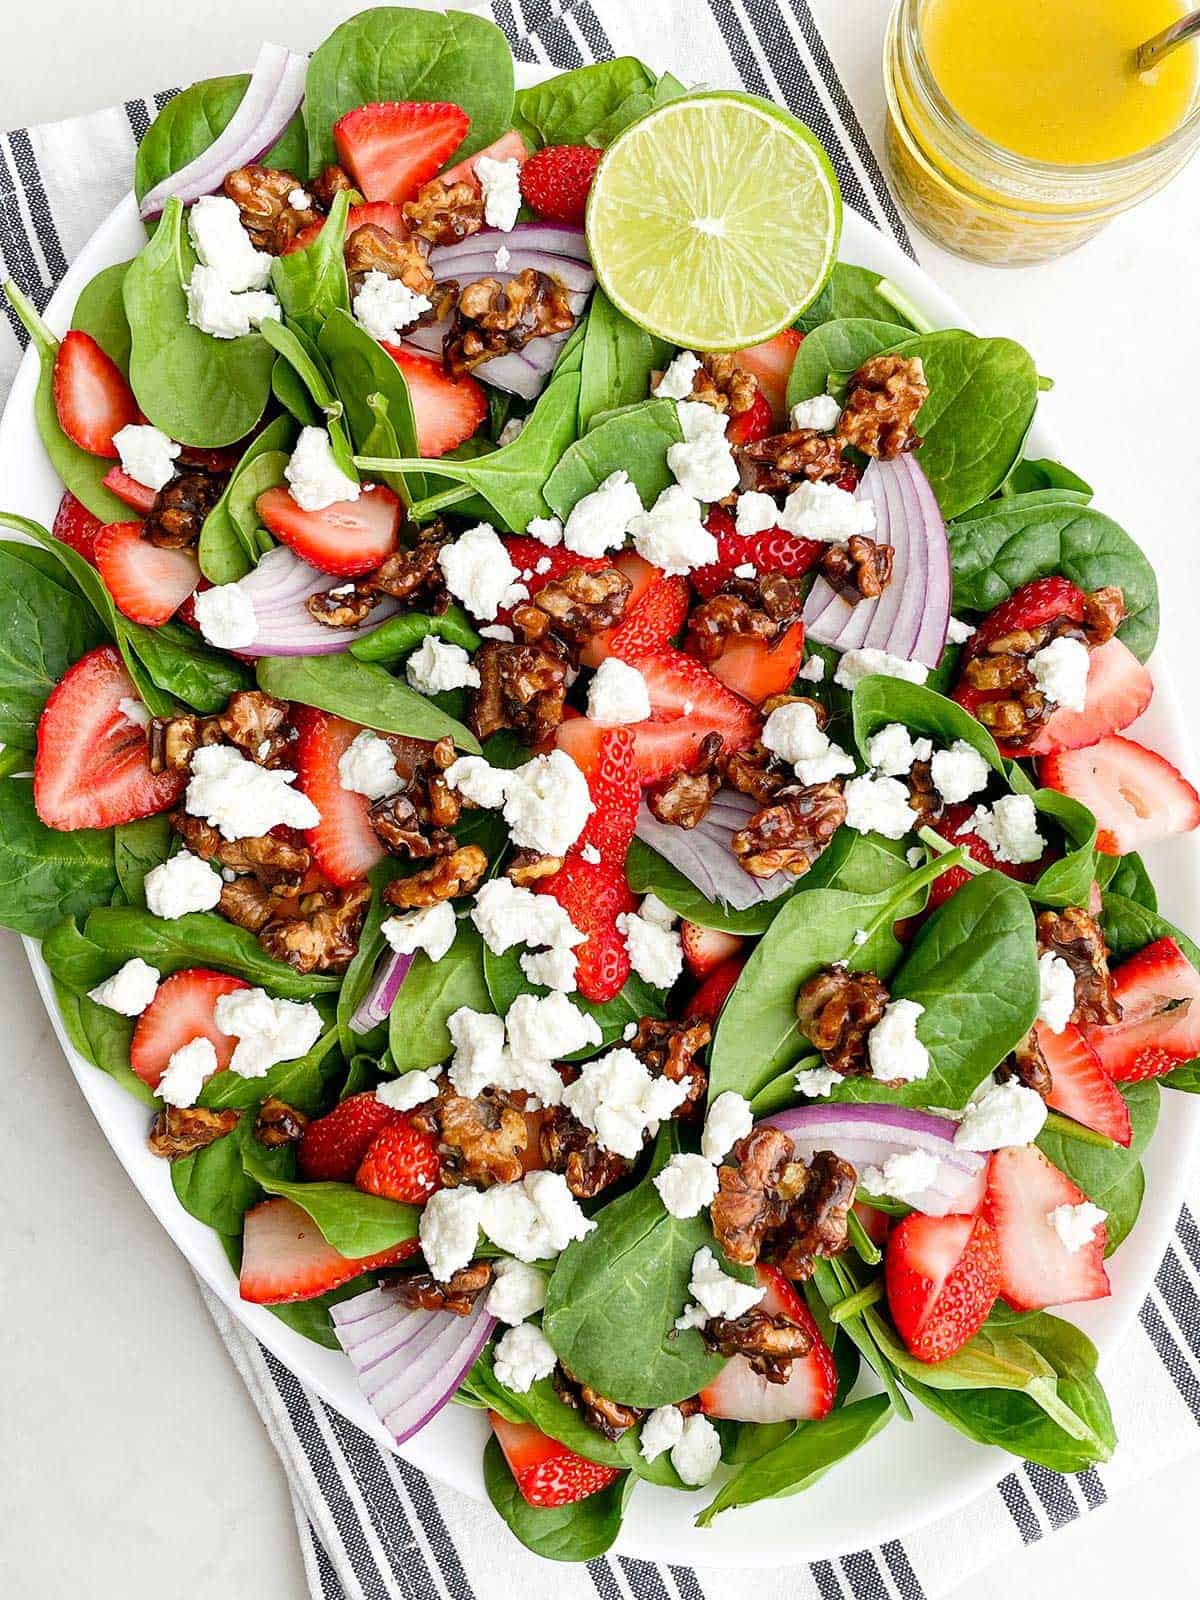 A fresh spinach salad with strawberries, walnuts, and goat cheese, served with a lime wedge and a glass of juice on the side.